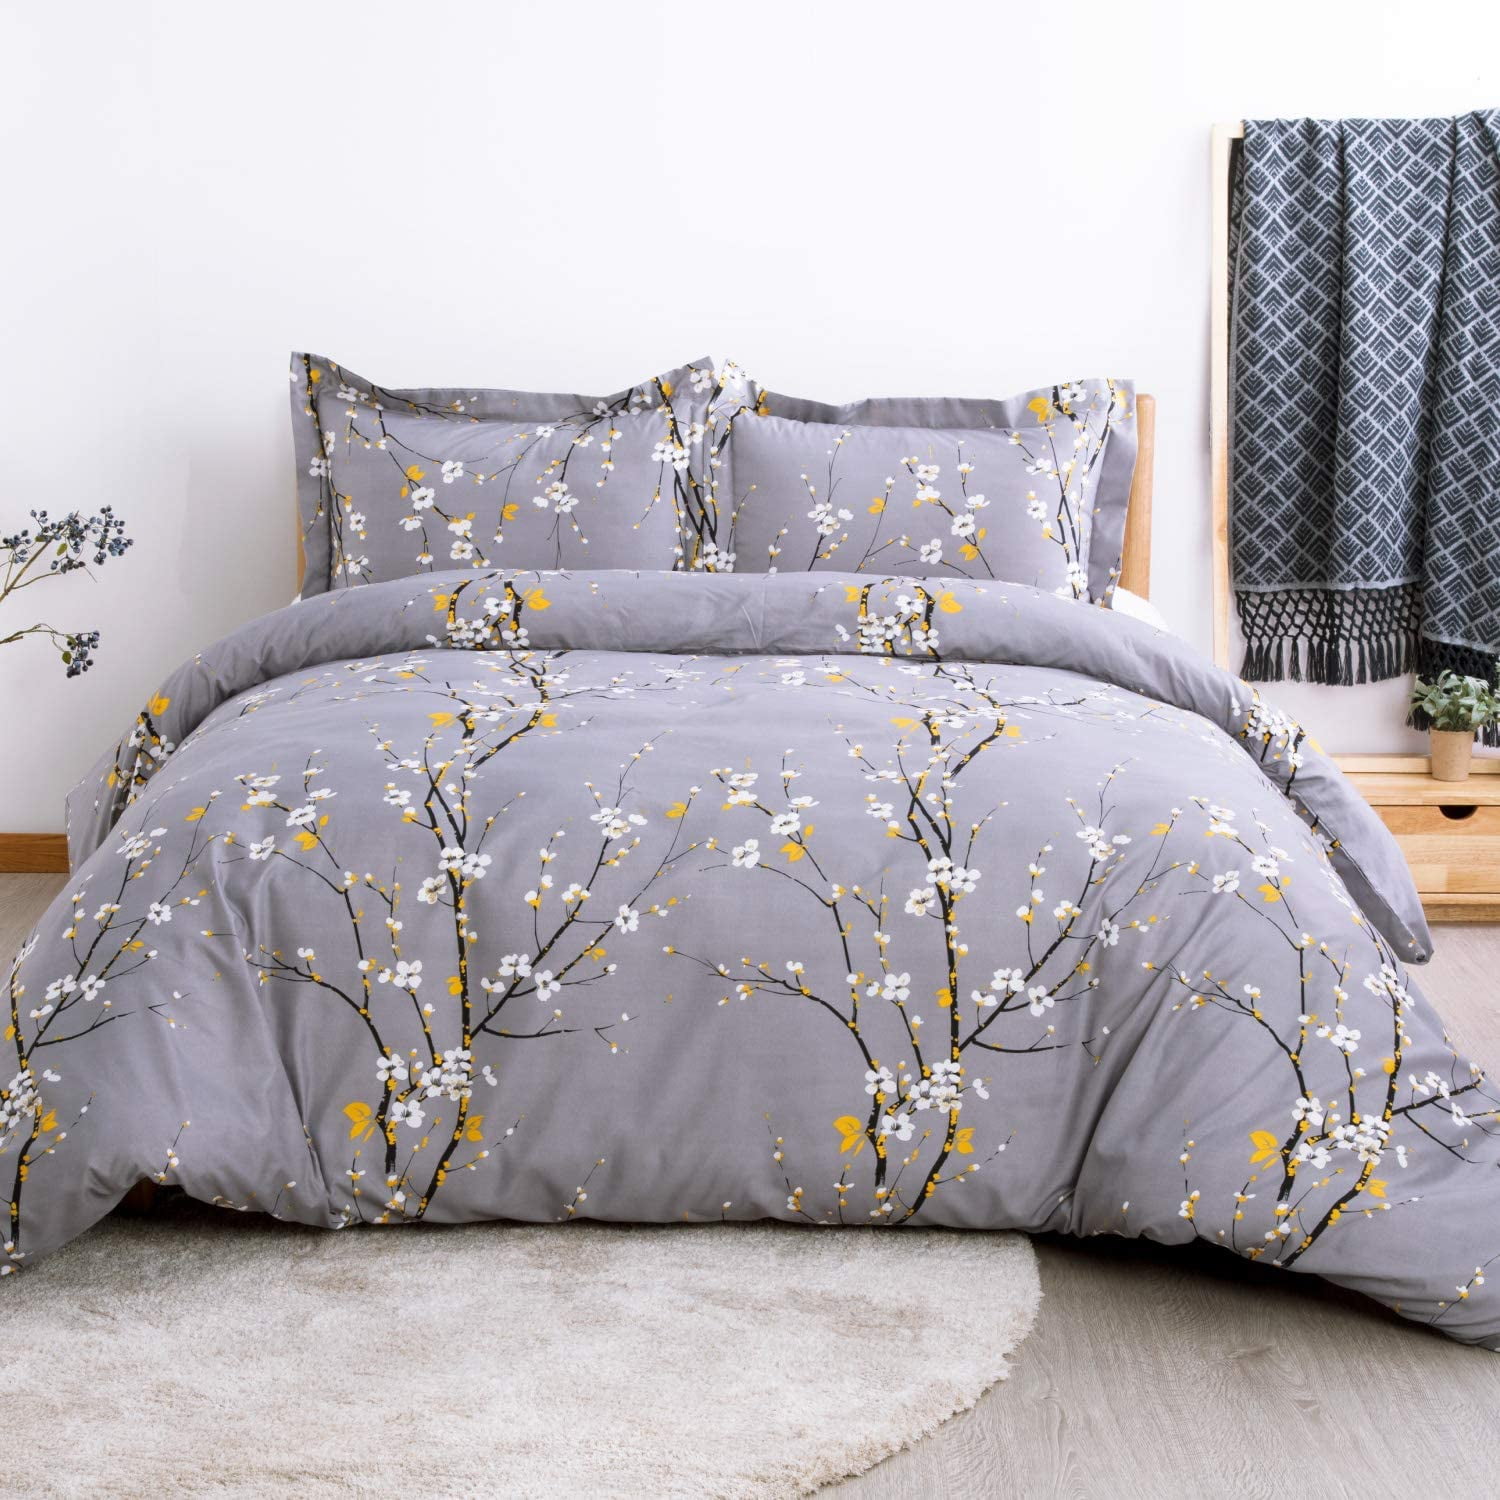 Golden Home Duvet Cover Set Twin Dark, What Size Is A Queen Duvet Cover In Inches